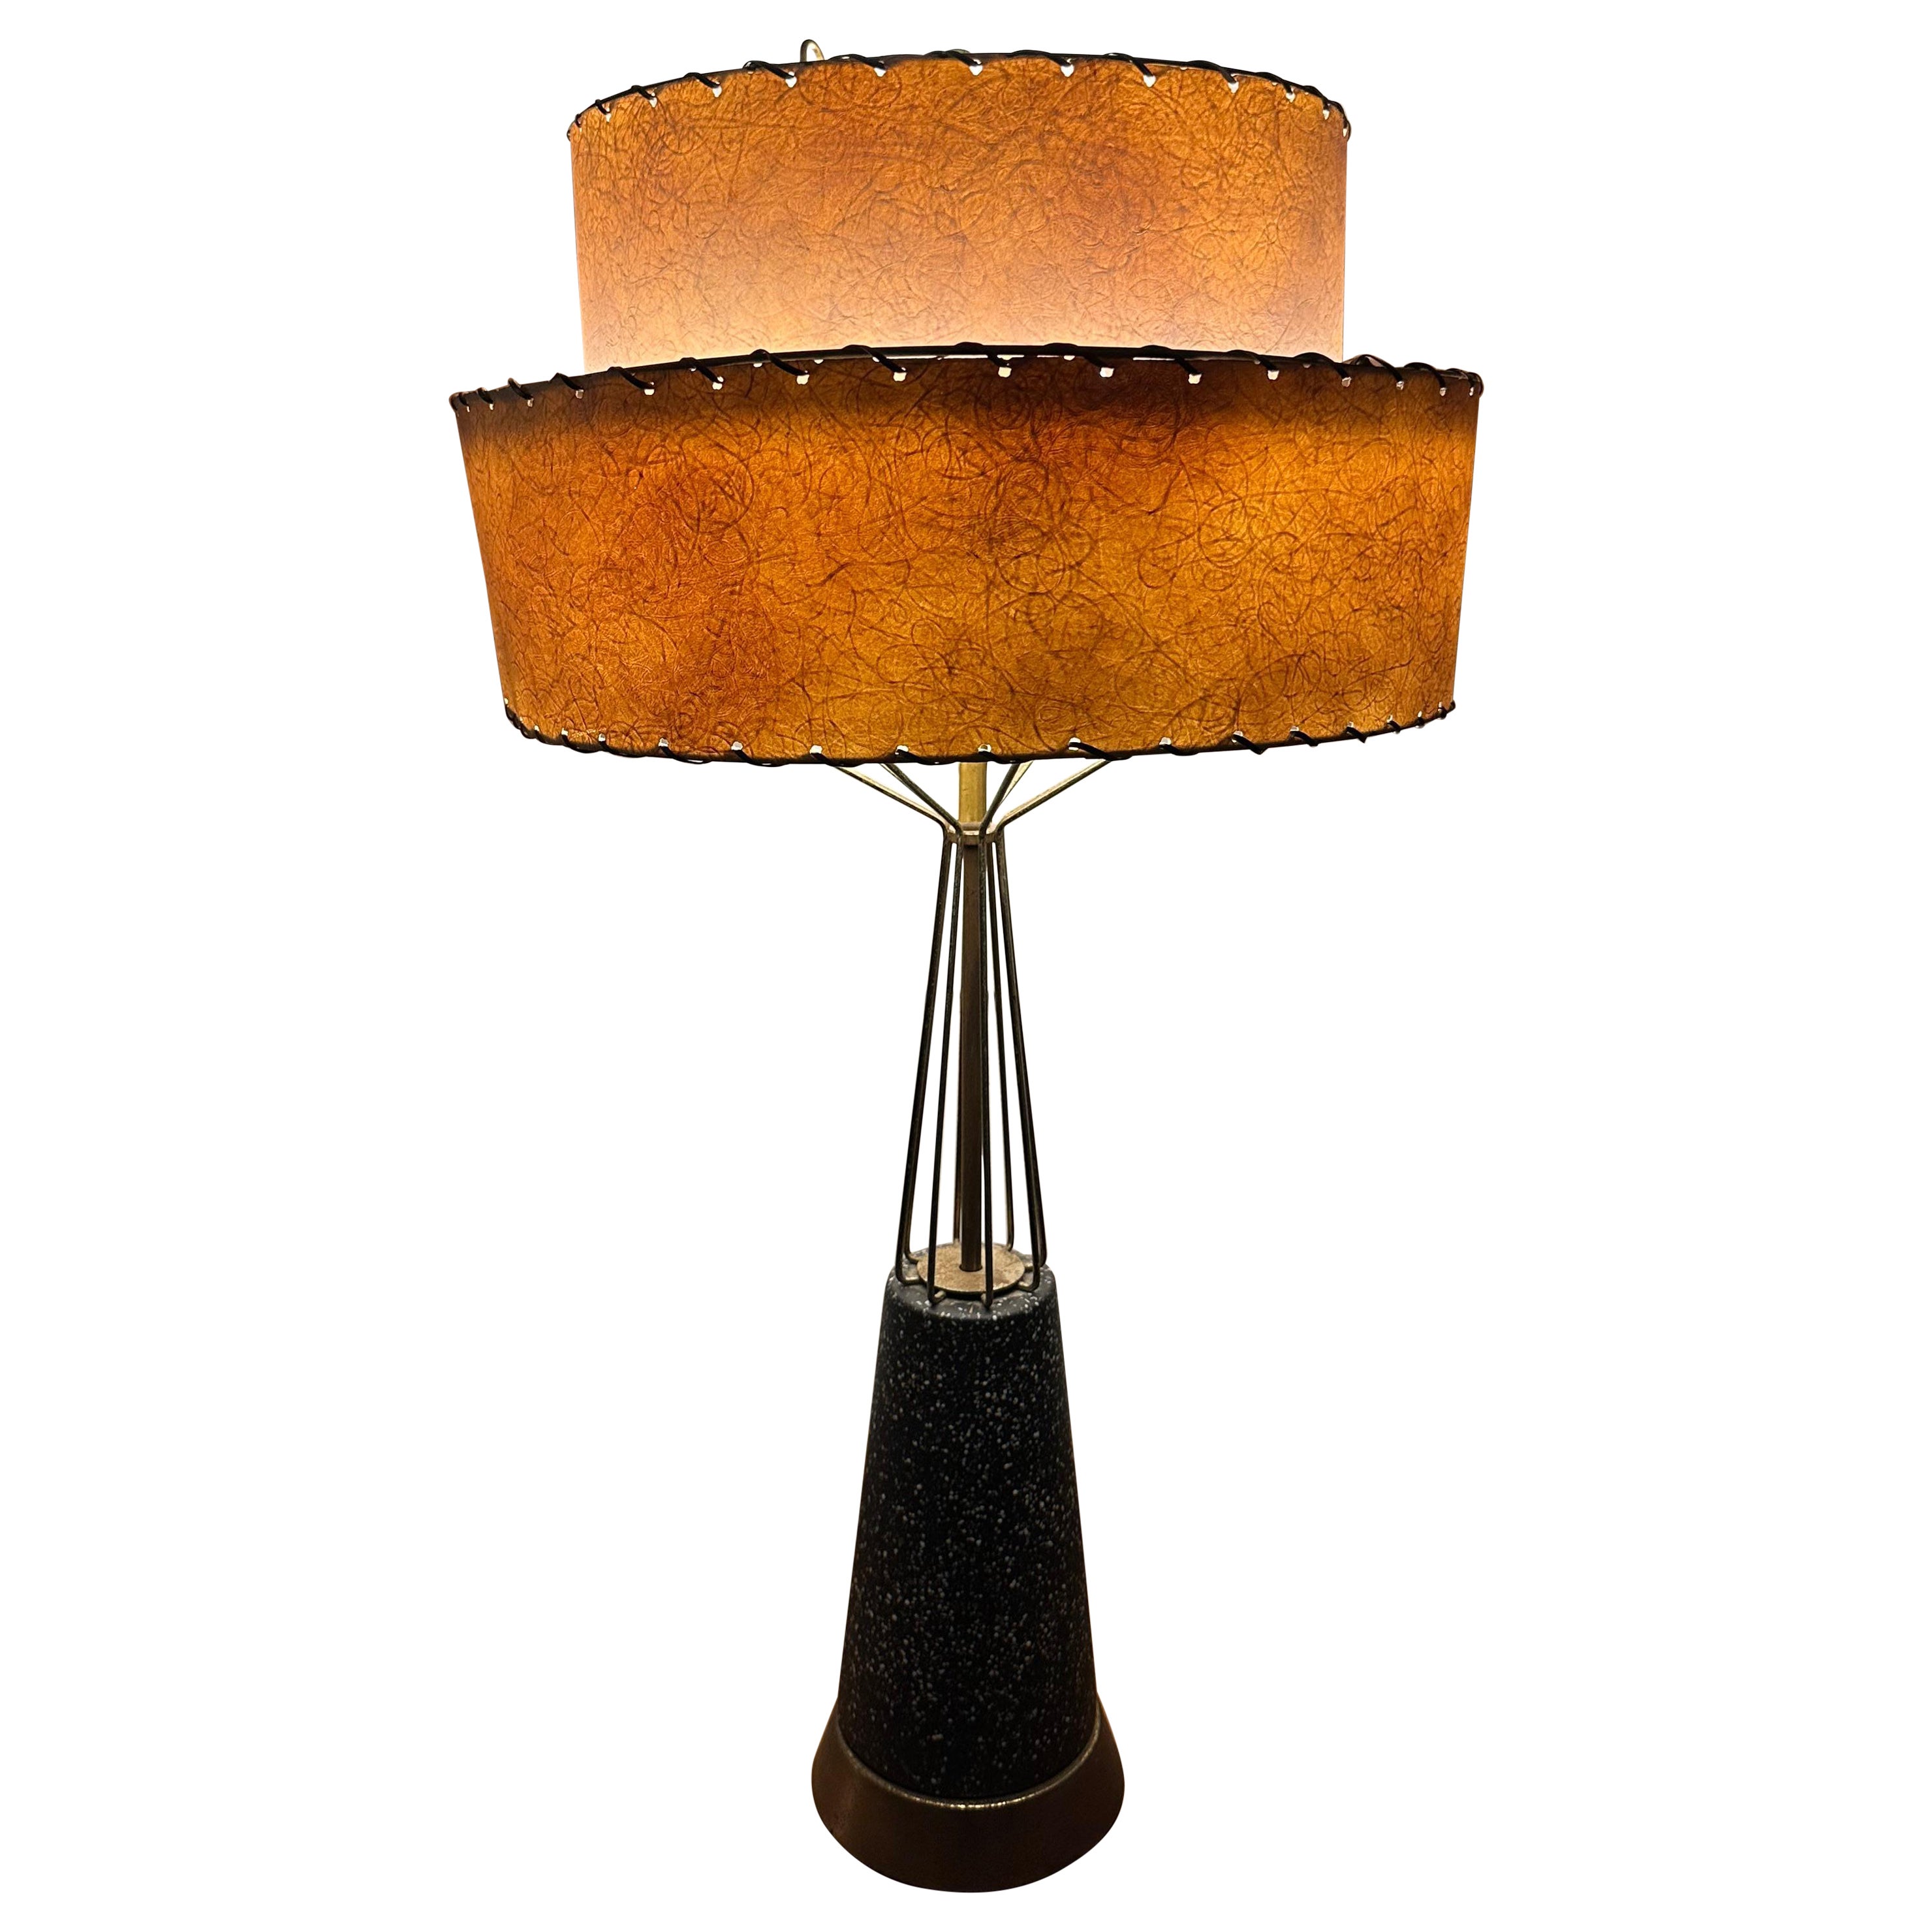 Mesmerizing Unique Mid-Century Modern Tall Table Lamp